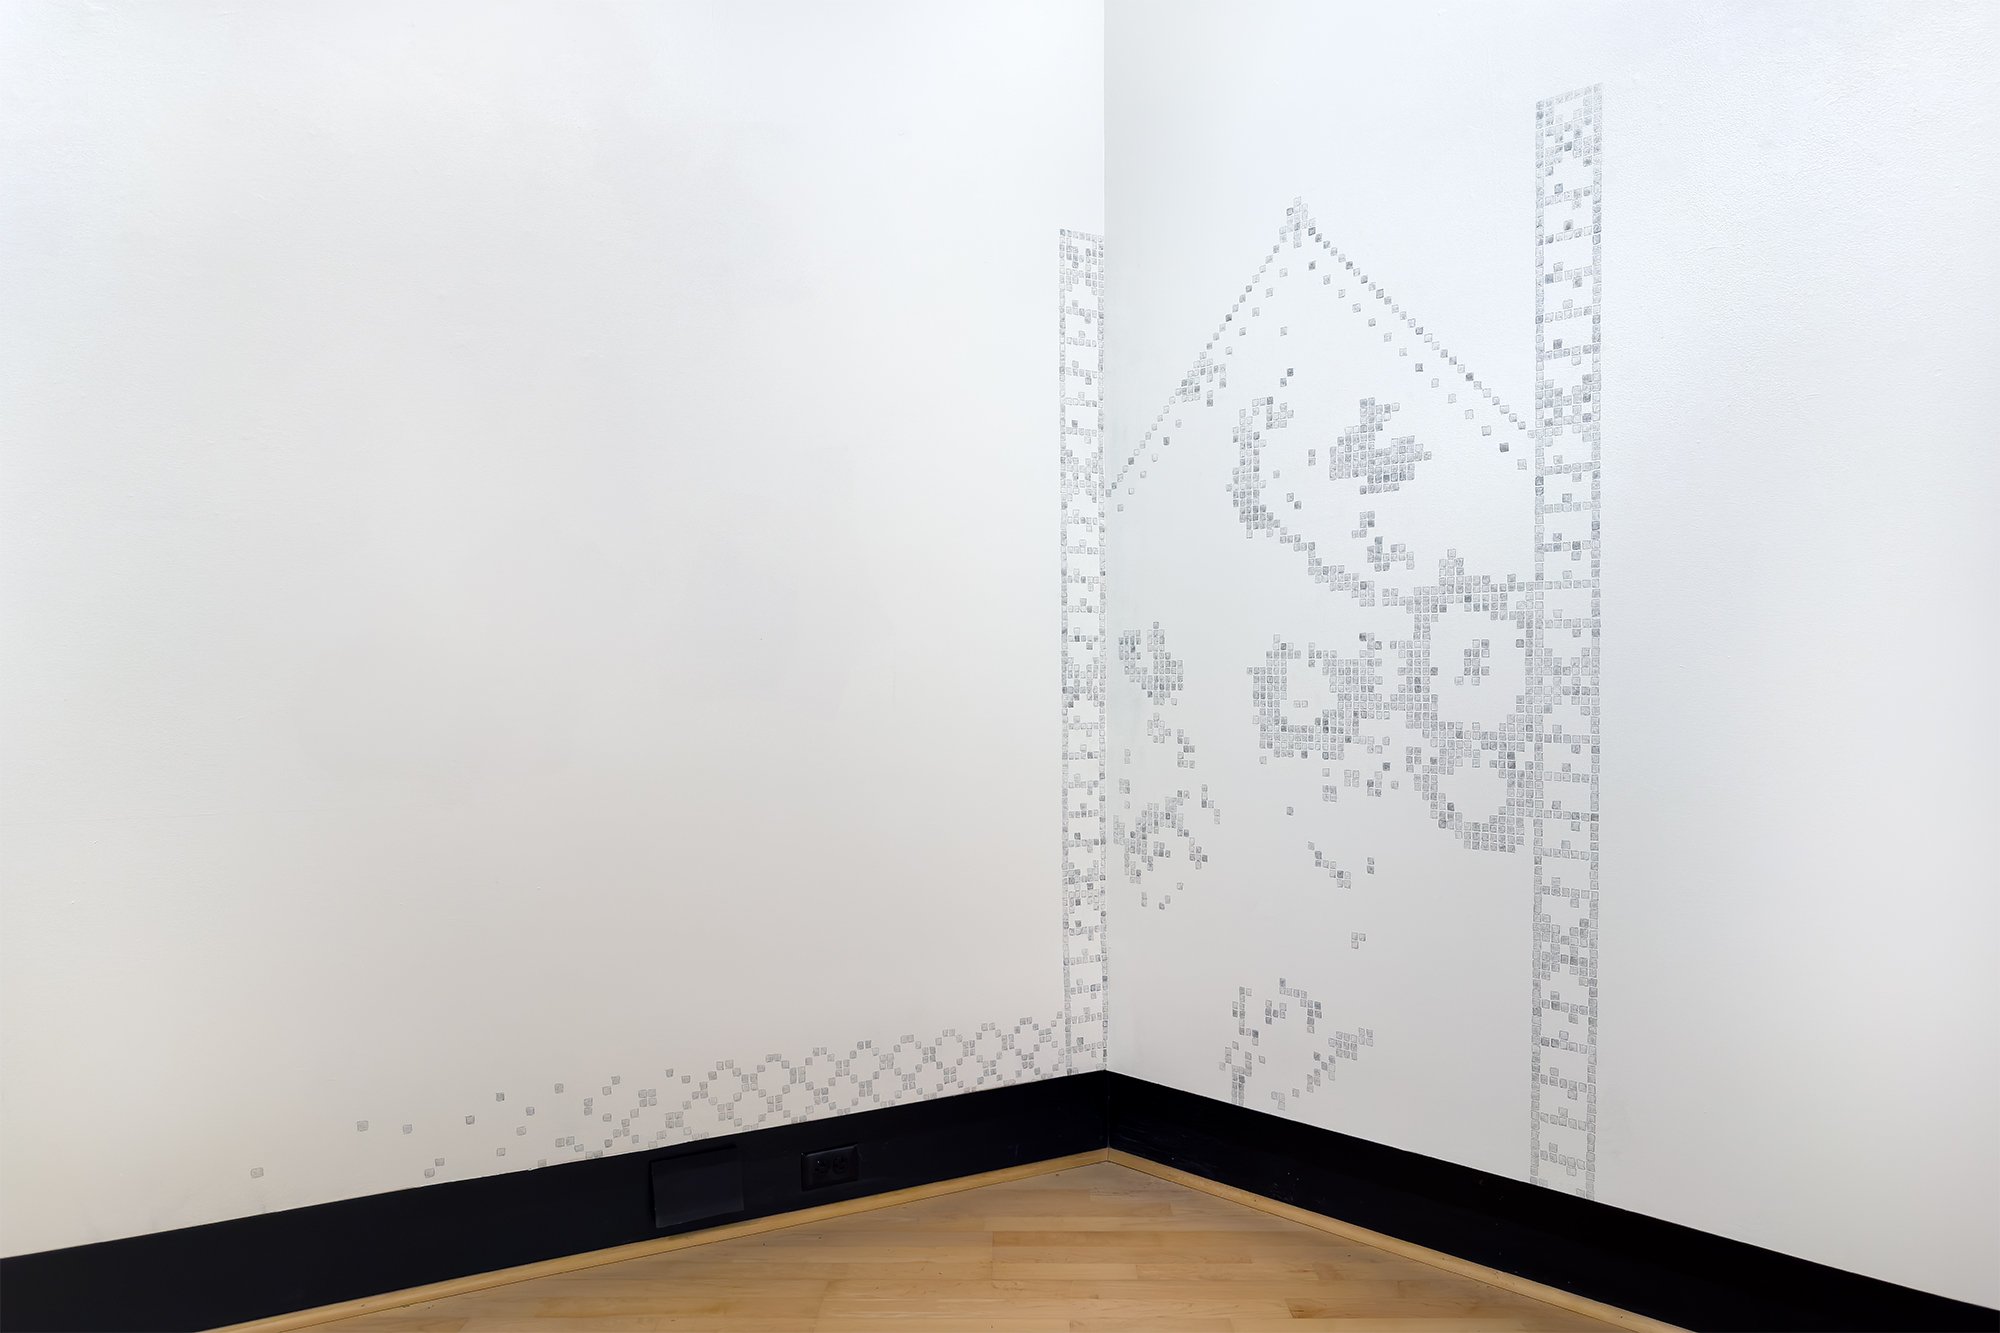    and when you change the landscape, is it with bare hands or with gloves? (lichen, woodwork, grate)  , 2023 graphite drawing of selbu mitten knitting chart 99 x 67 linear in. as installed  Kristen Wigley-Fleming Gallery, Luther College, Decorah IA 